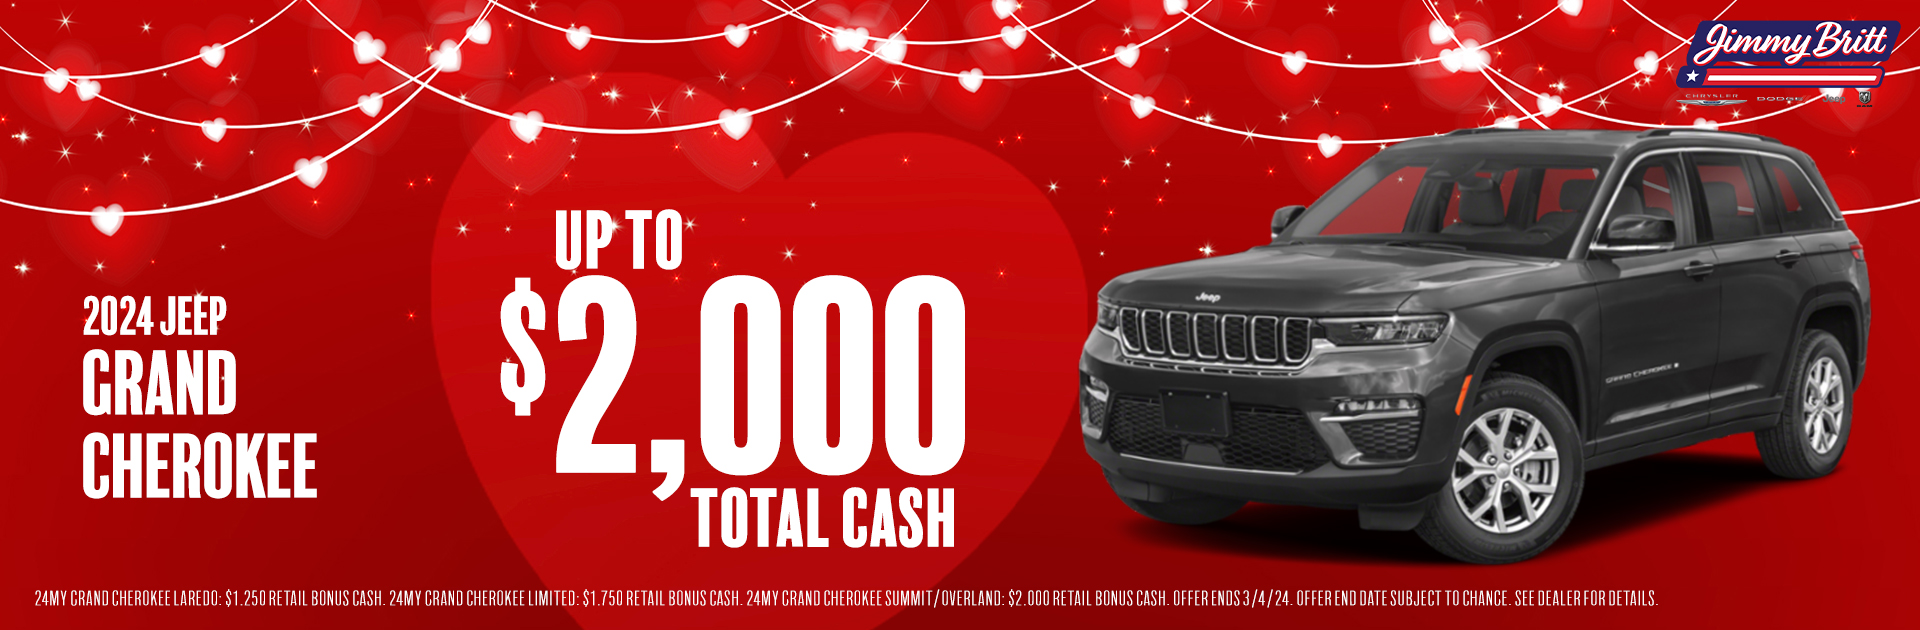 2024 Jeep Grand Cherokee: Up to $2,000 total cash!